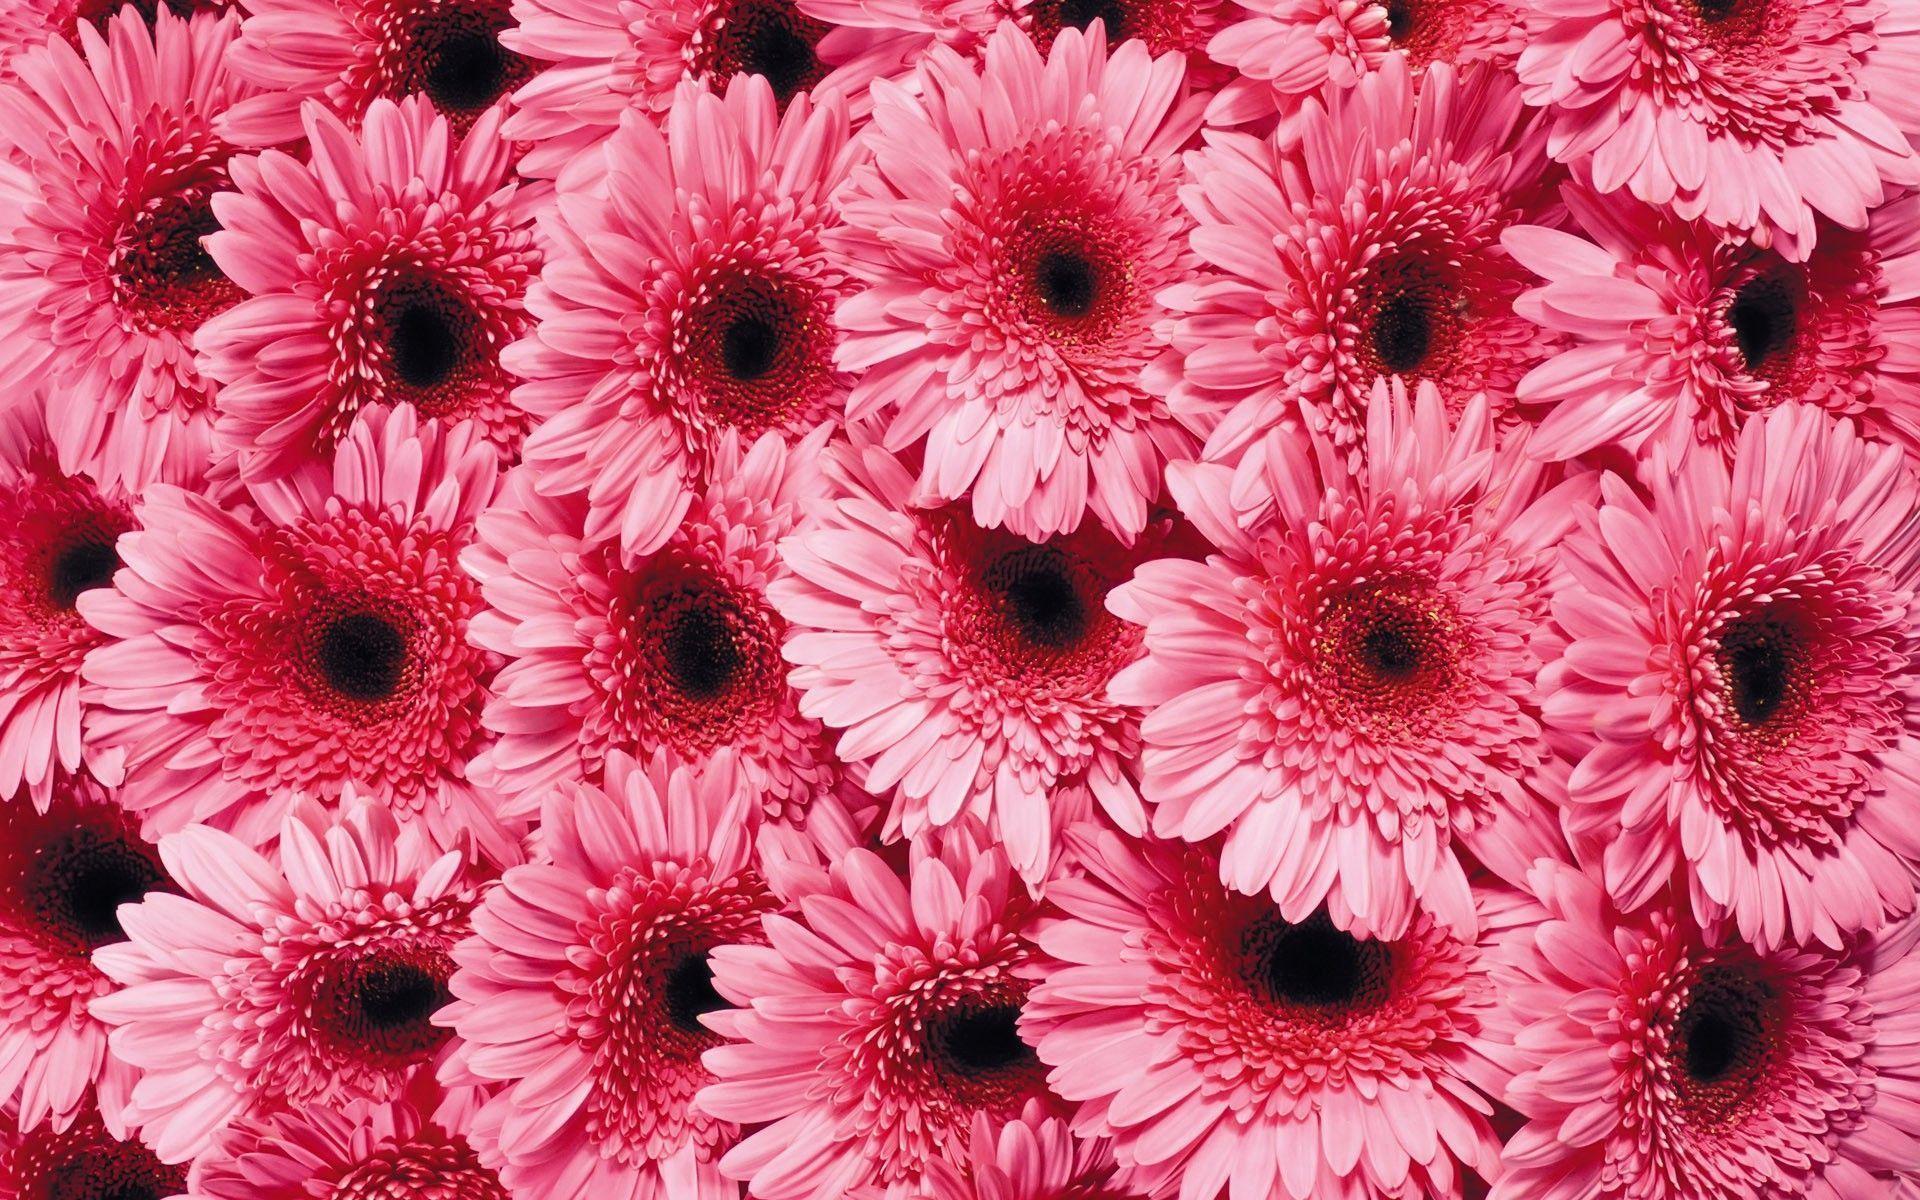 Premium Photo  Two pink gerbera daisy flowers on a gray background